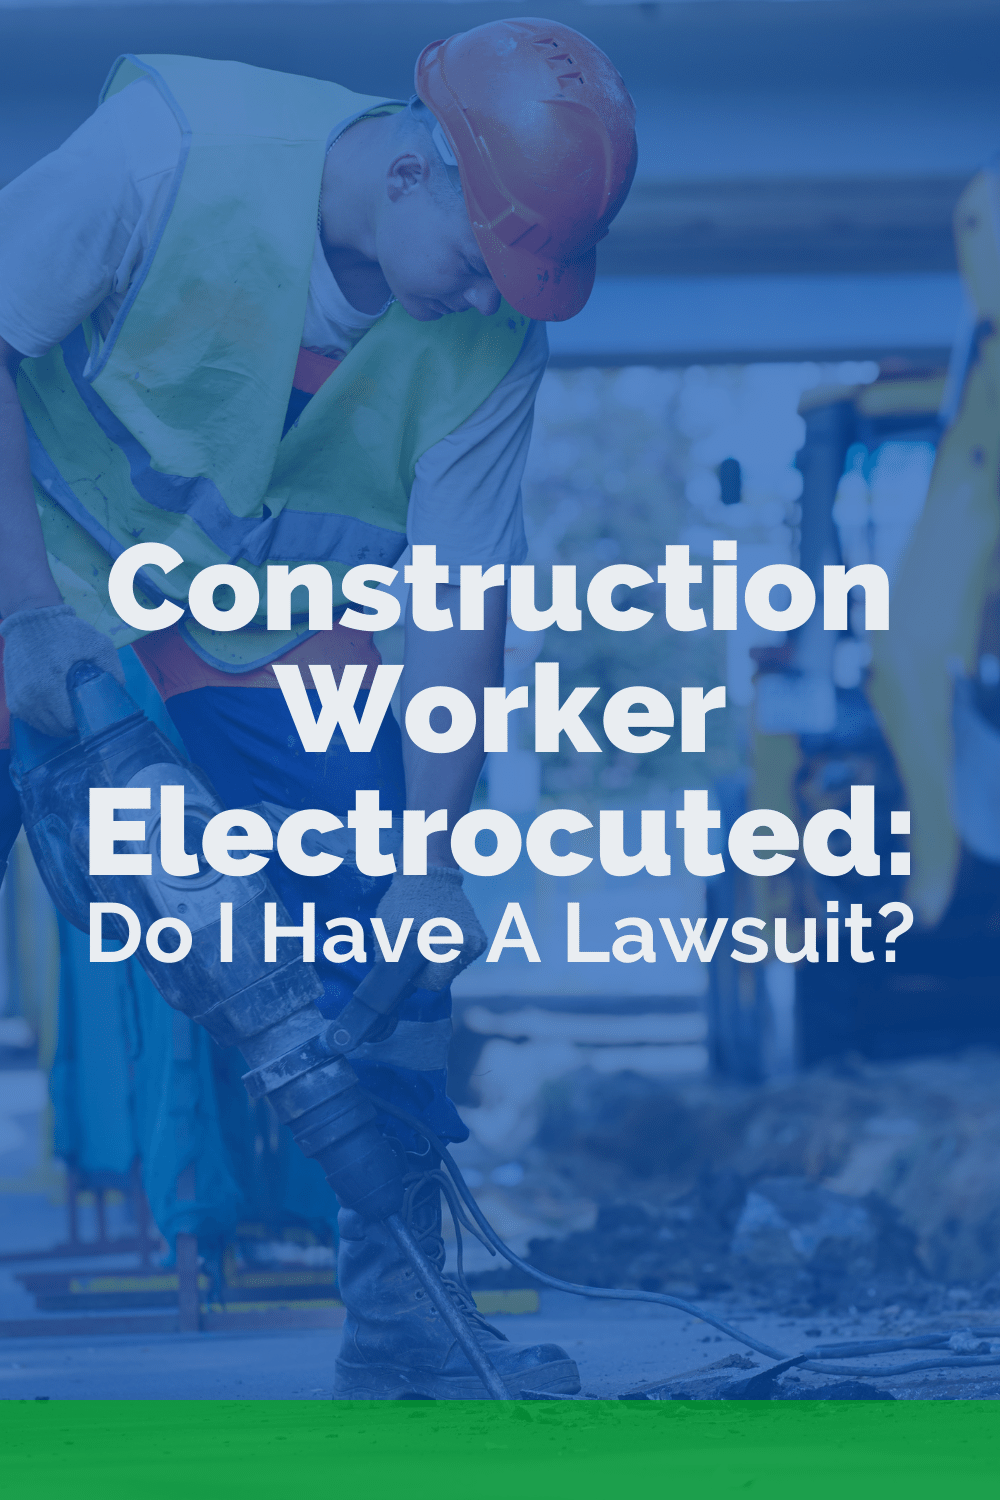 Construction Worker Electrocuted: Do I Have A Lawsuit?